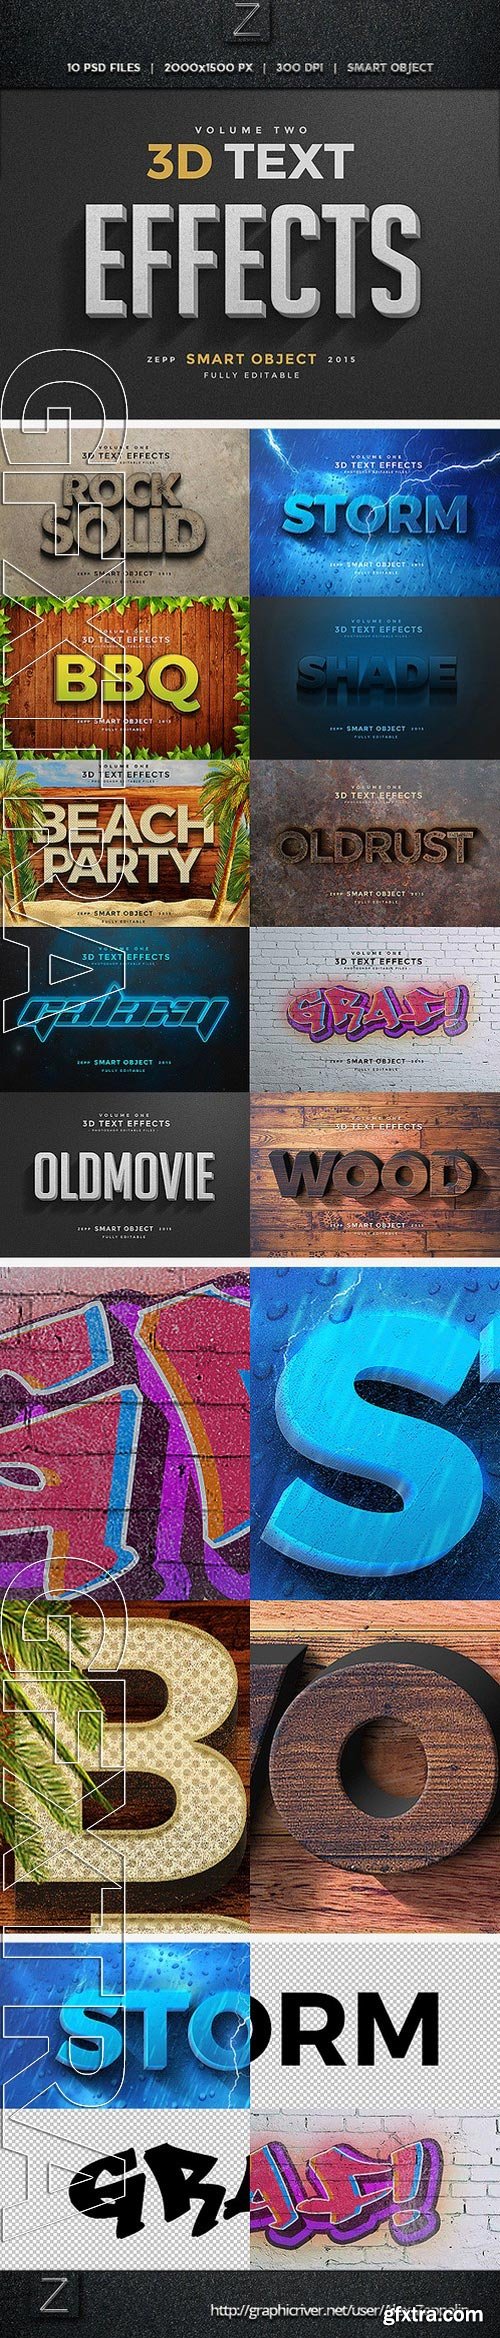 GraphicRiver - 3d Text Effects Vol2 11477715